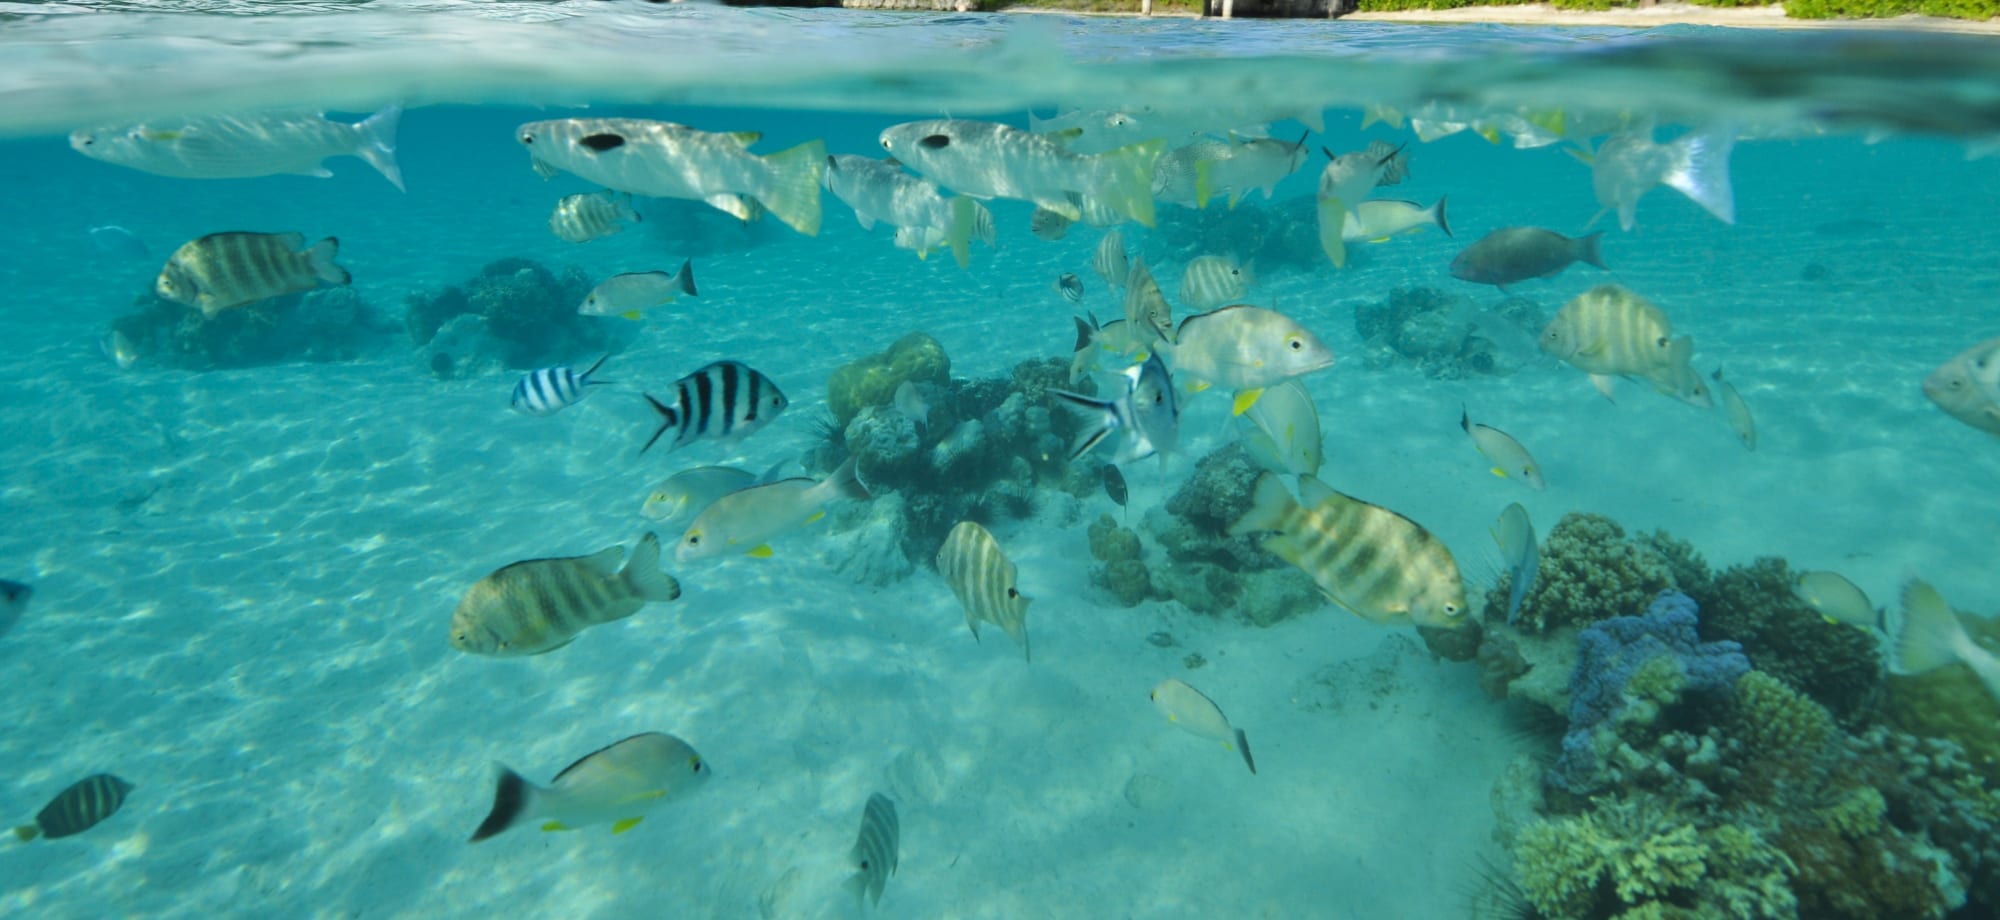 Fishes are swimming in the ocean and surrounded by coral reefs.